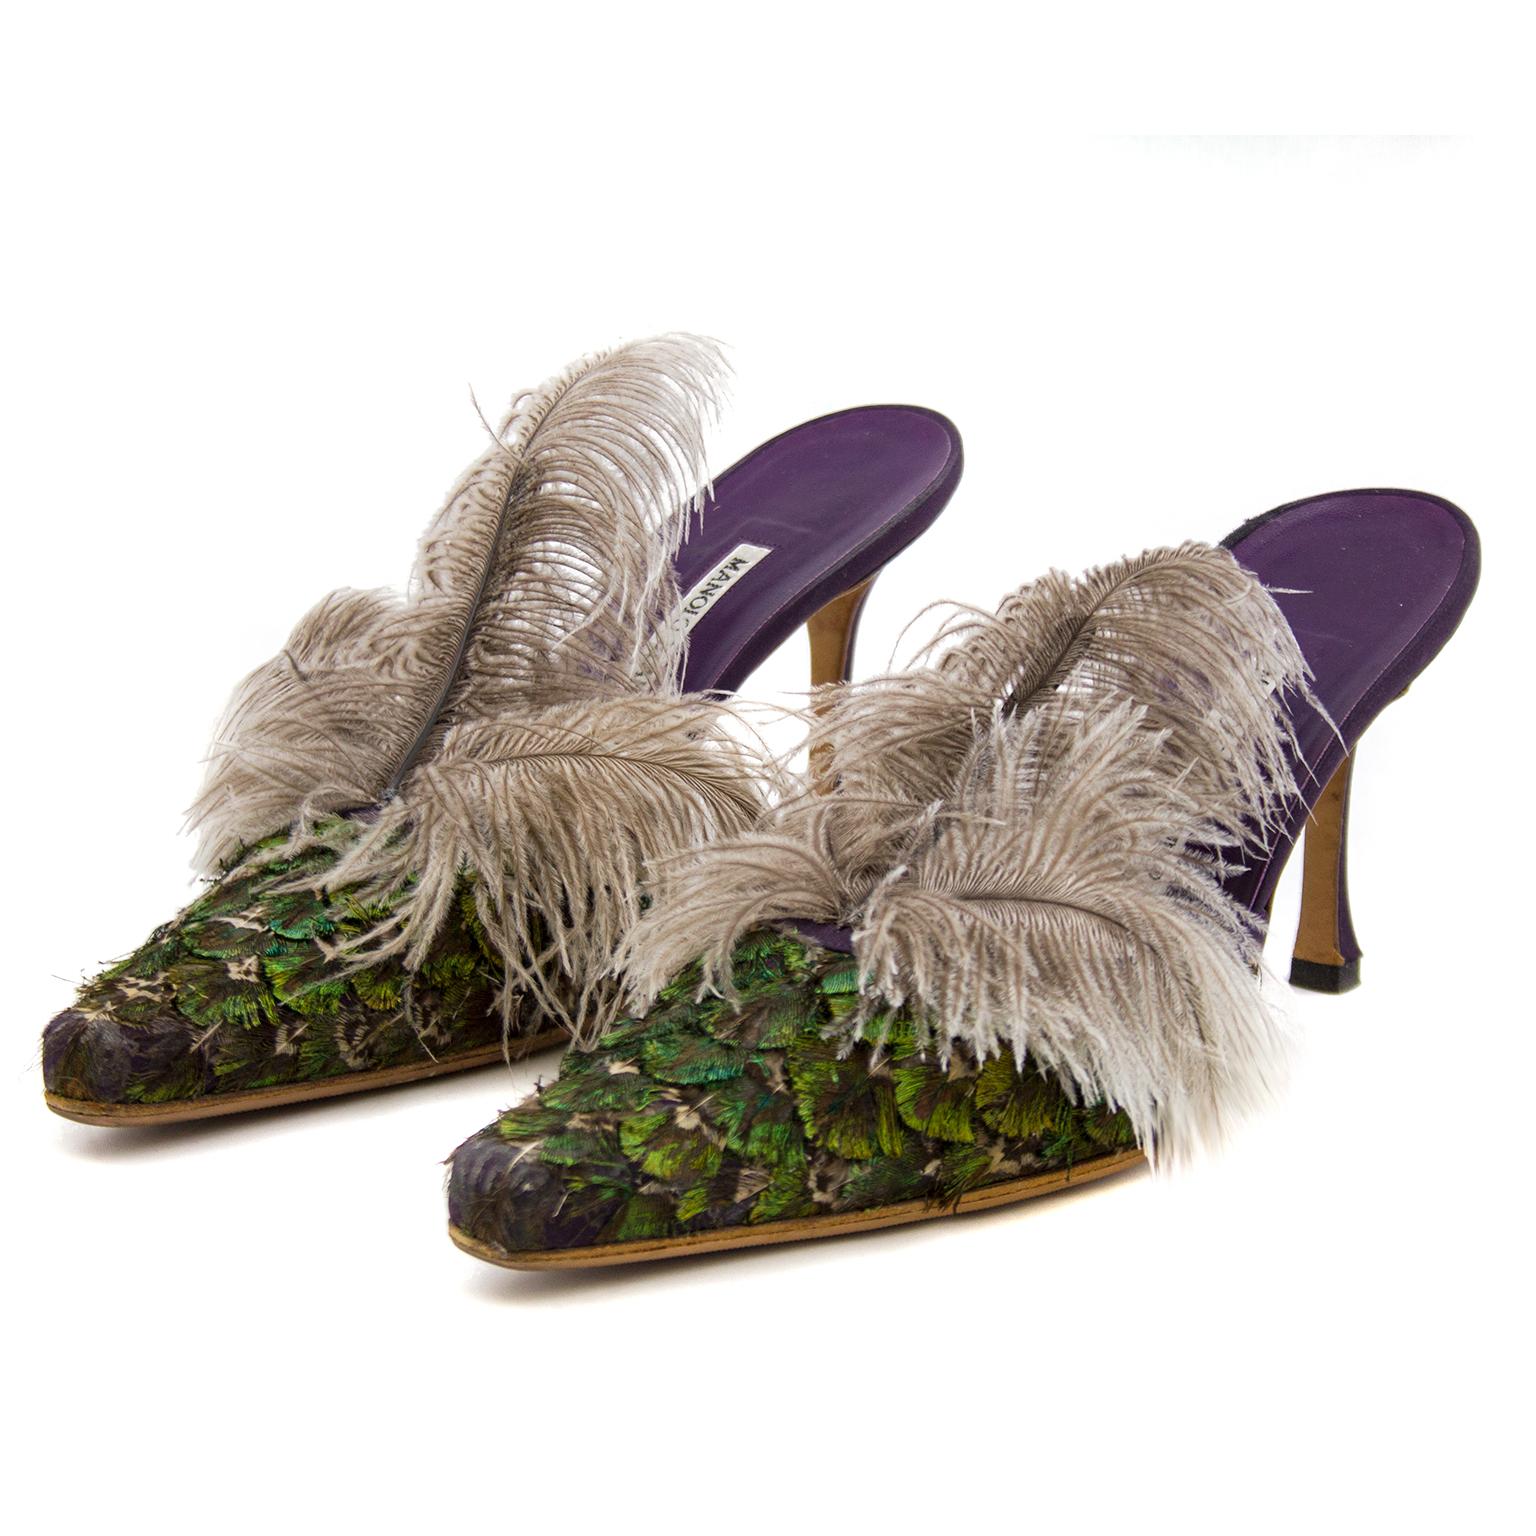 Birds of a feather! These Manolo Blahnik high heeled mules look like a pair of exotic birds for your feet. The pointed toe box is covered in iridescent green and purple feathers in an overlapping formation and finished with a plume of 3 grey long